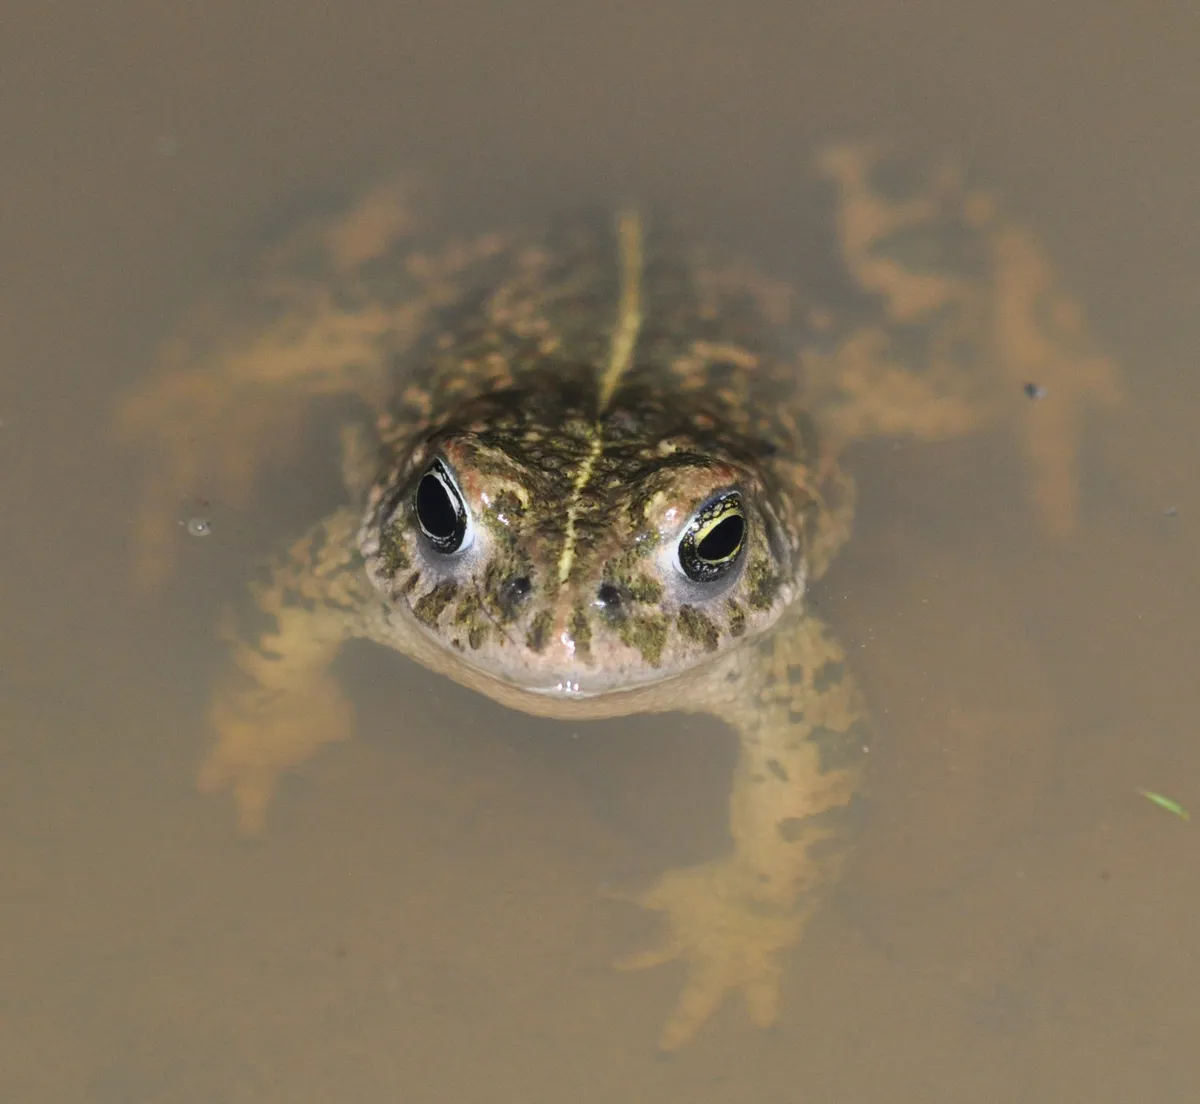 Natterjack toad, showing the yellow line down its back. © Chris Dresh